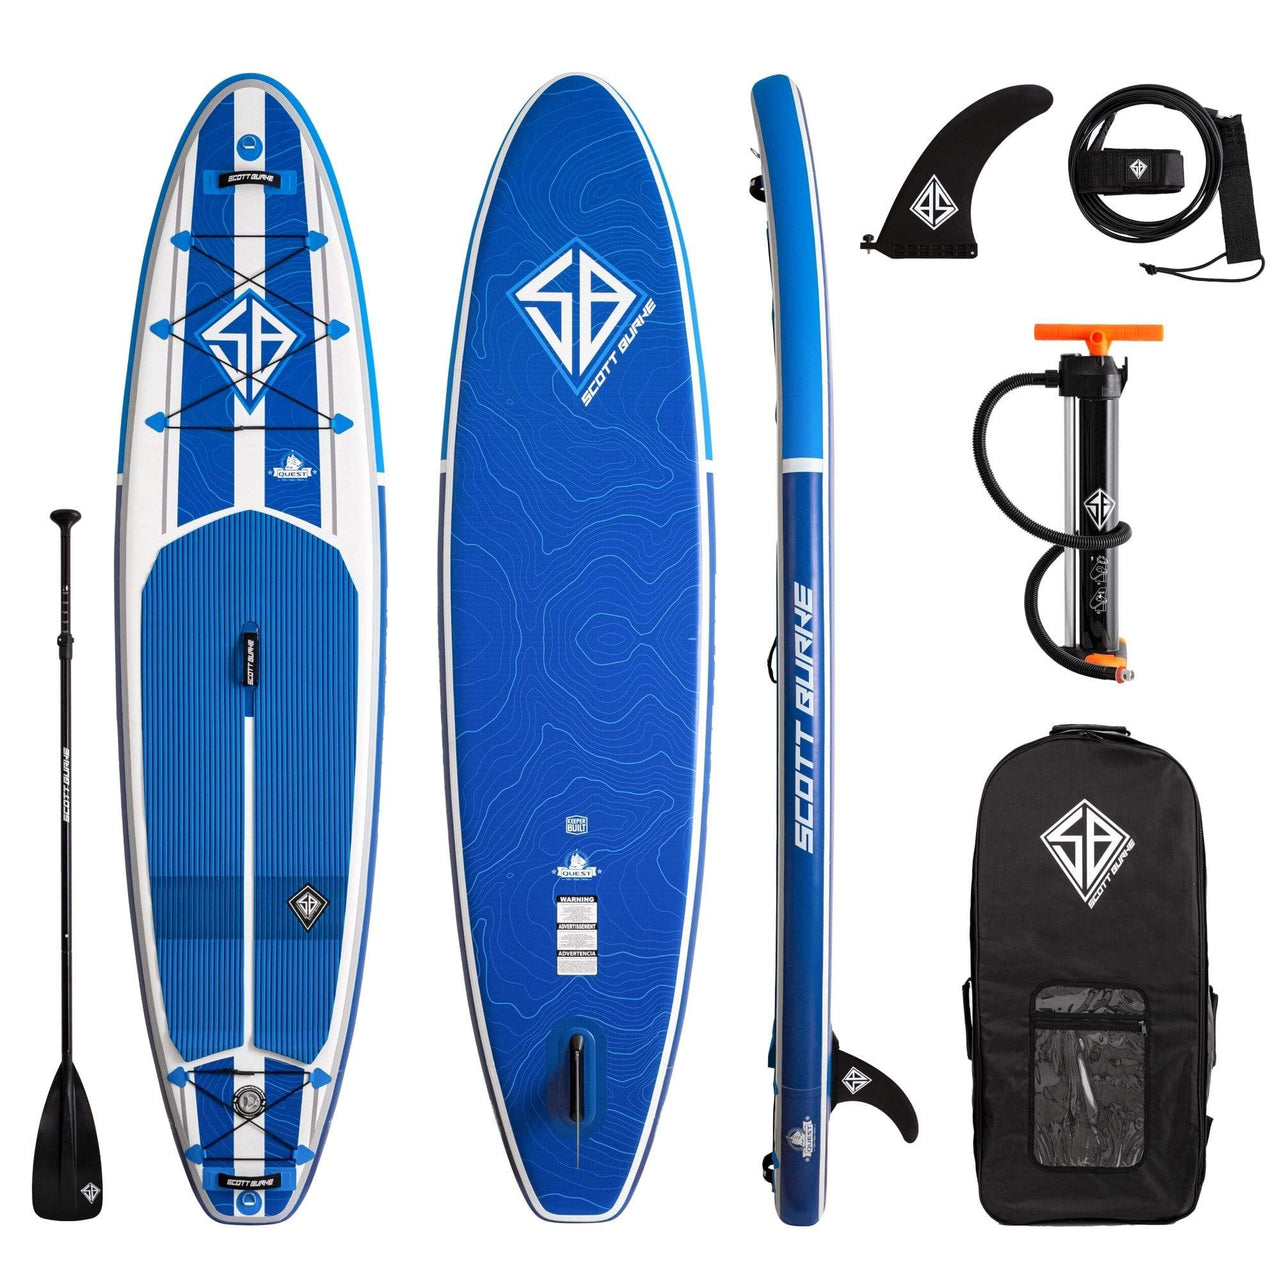 Scott Burke 11' Quest Inflatable SUP Paddleboard - Good Wave package